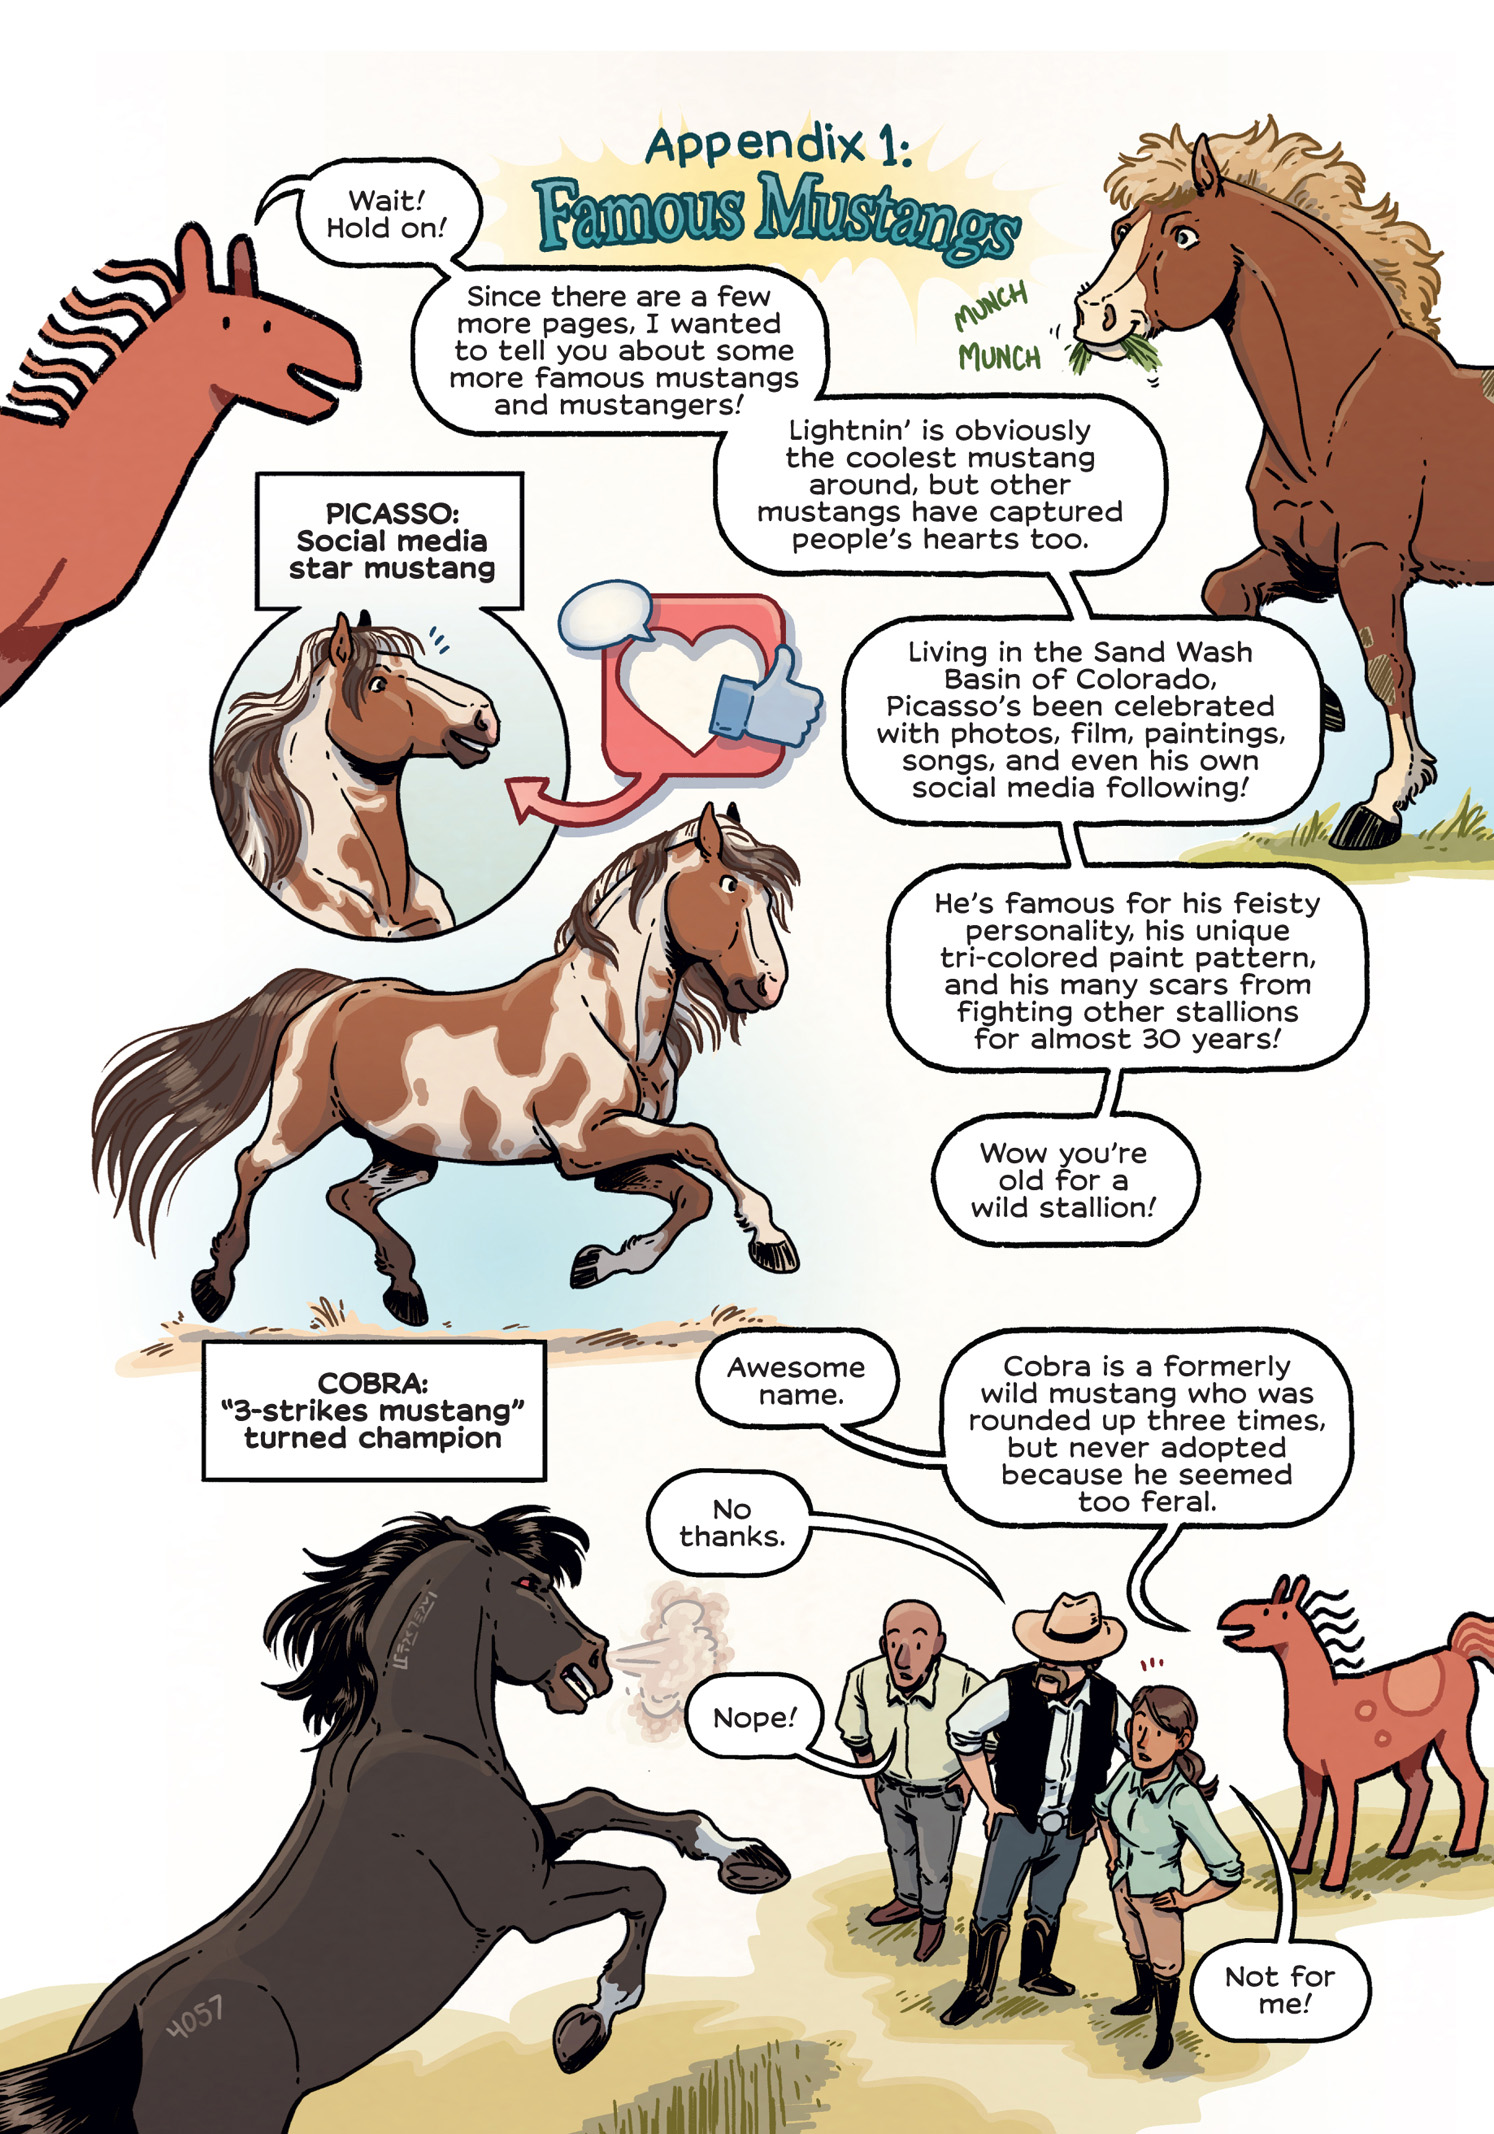 Read online History Comics comic -  Issue # The Wild Mustang - Horses of the American West - 121